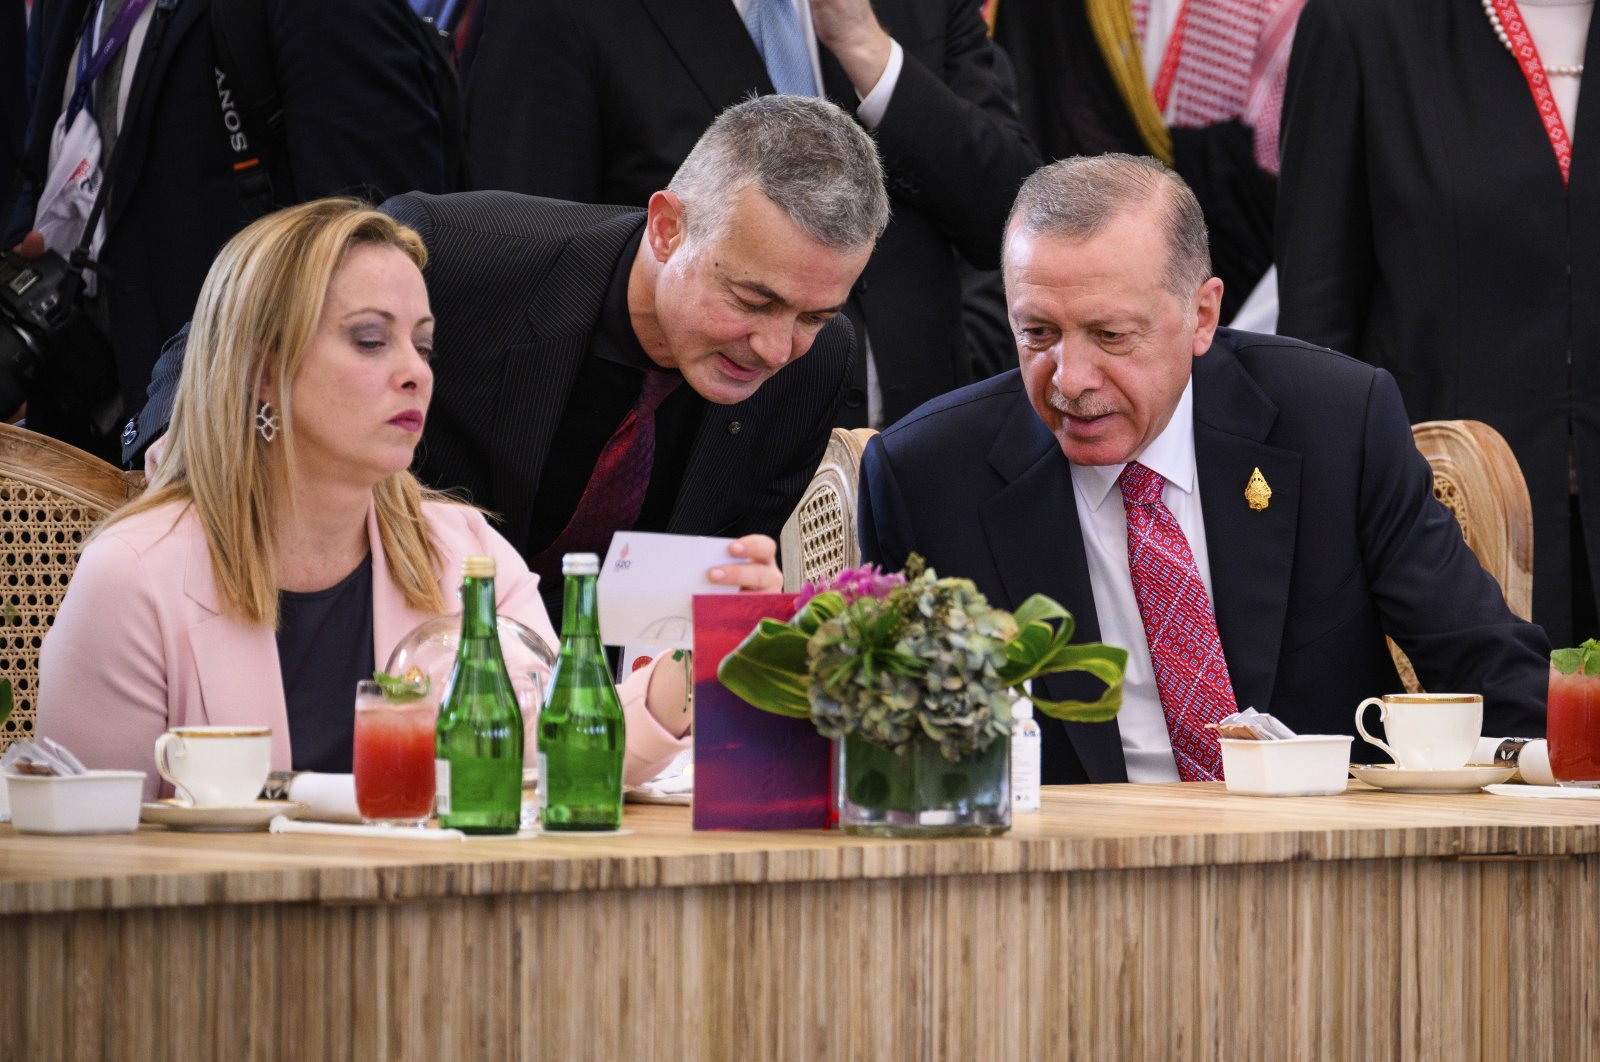 Italian Prime Minister Giorgia Meloni (L) and President Recep Tayyip Erdoğan chat ahead of a working lunch at the G-20 summit, Nusa Dua, Bali, Indonesia, Nov. 15, 2022. (AP Photo)